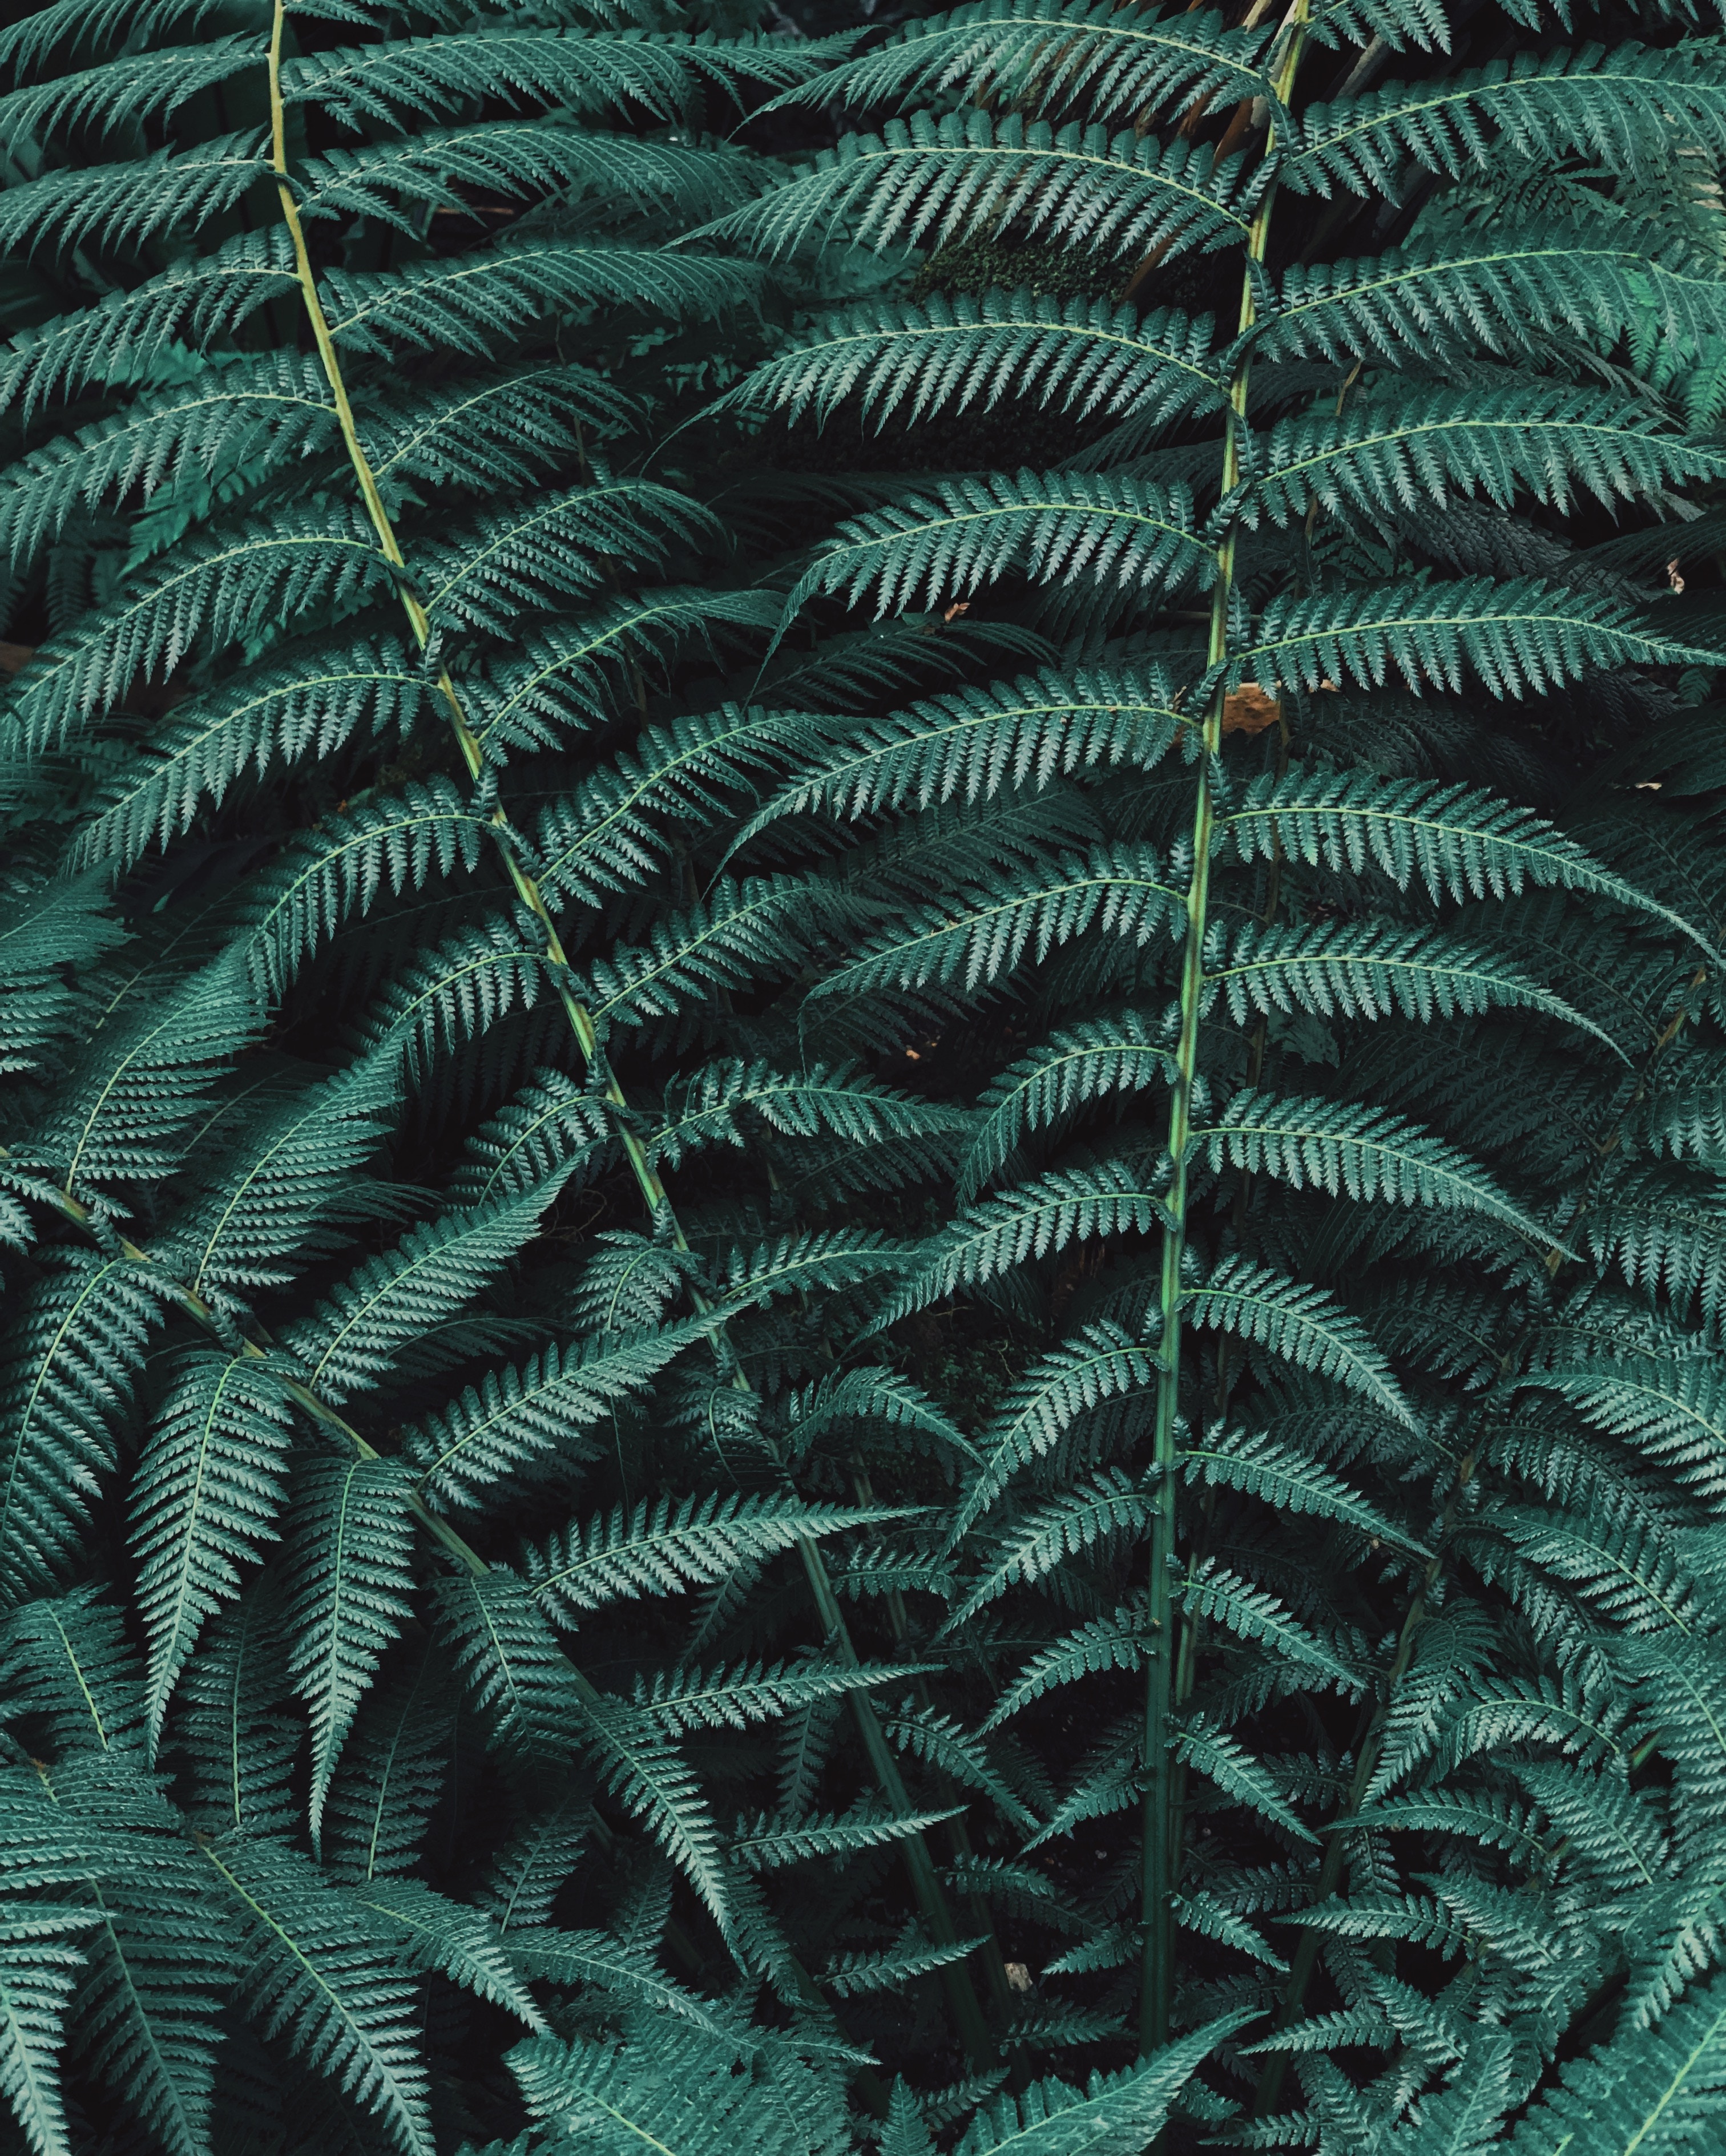 Lock Screen PC Wallpaper nature, leaves, green, plant, fern, carved